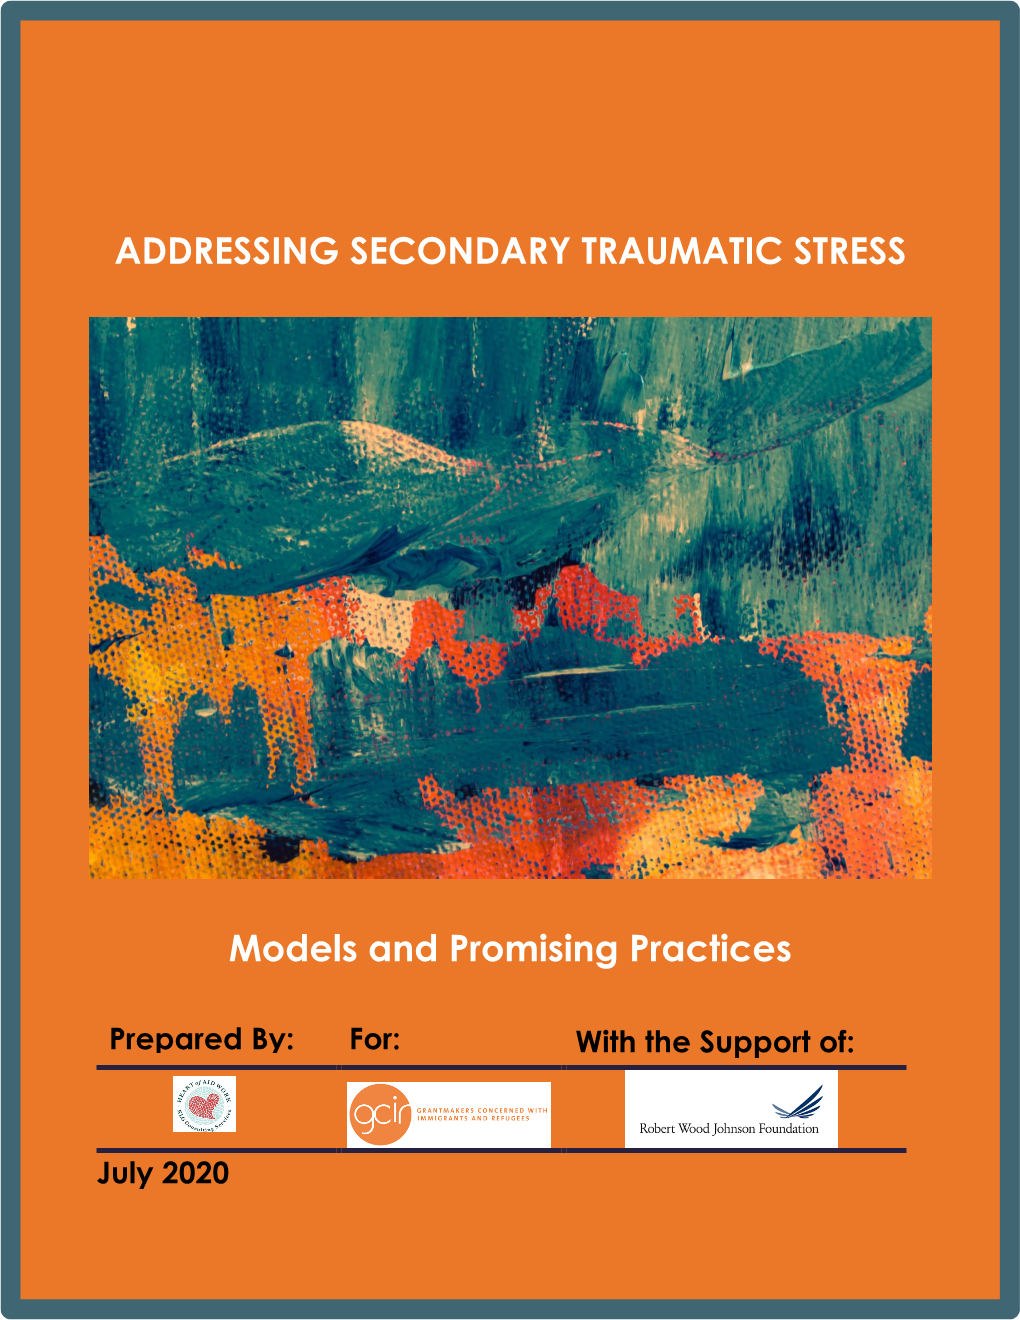 ADDRESSING SECONDARY TRAUMATIC STRESS: Models and Promising Practices